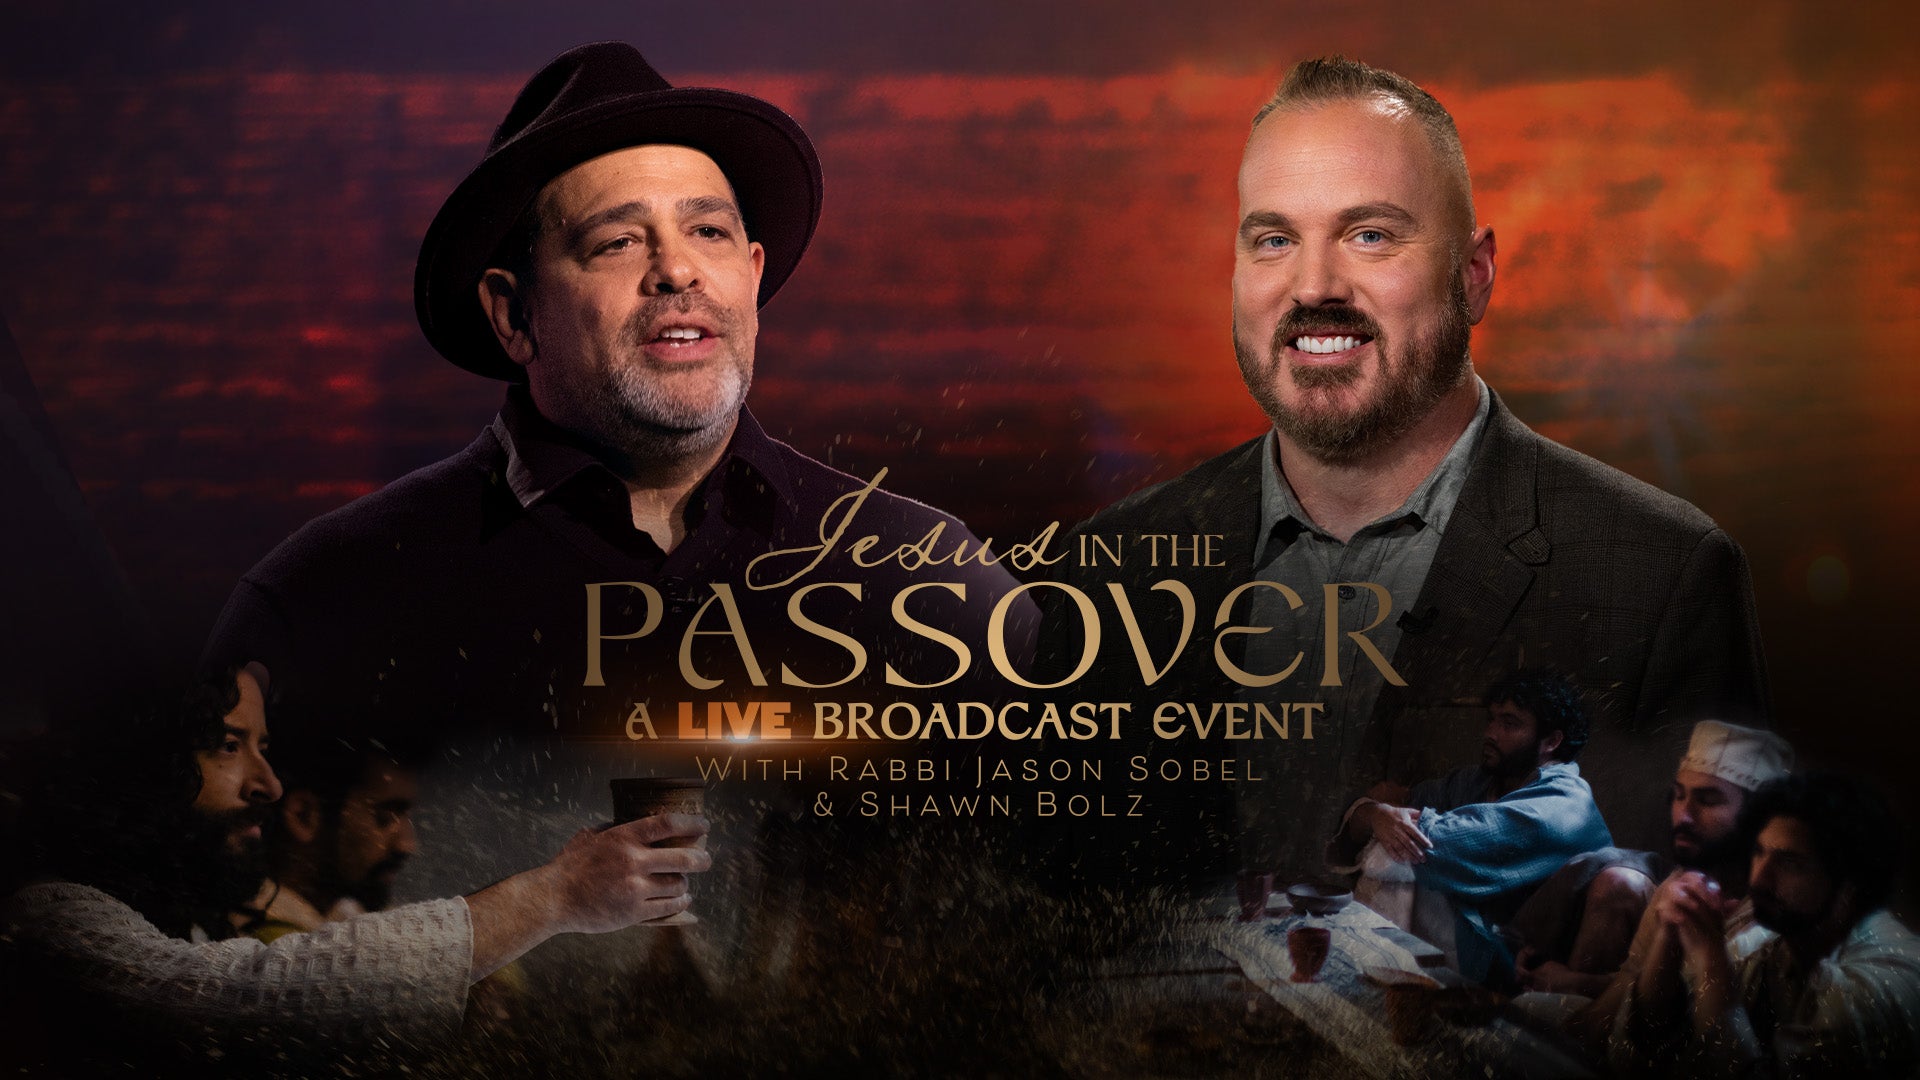 Jesus in the Passover with Rabbi Jason Sobel and Shawn Bolz